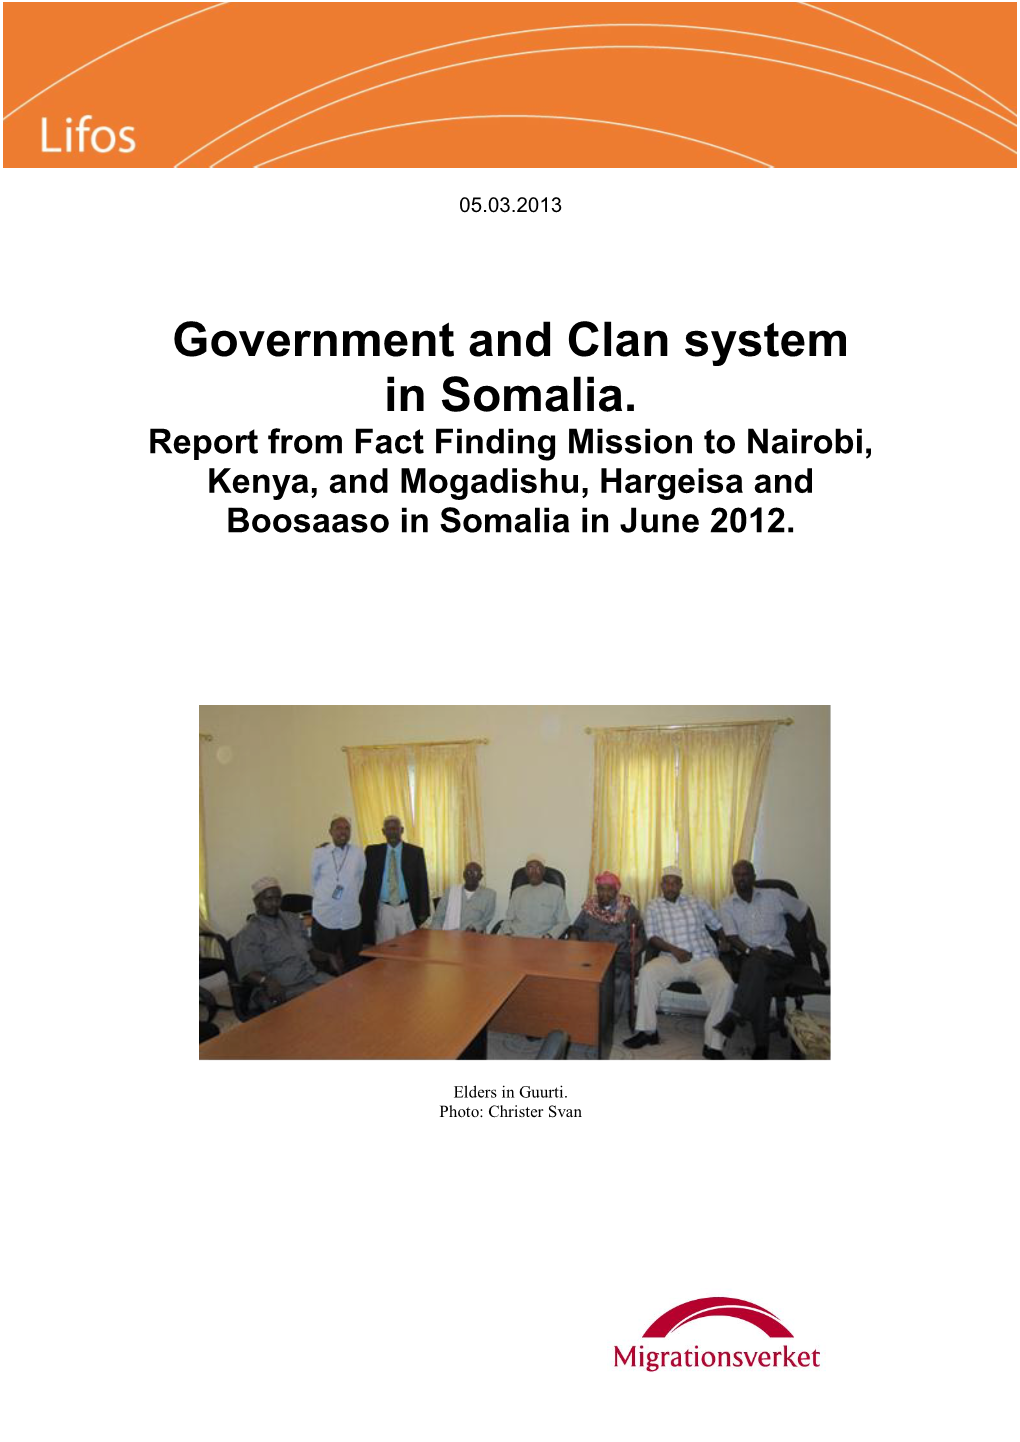 Government and Clan System in Somalia. Report from Fact Finding Mission to Nairobi, Kenya, and Mogadishu, Hargeisa and Boosaaso in Somalia in June 2012